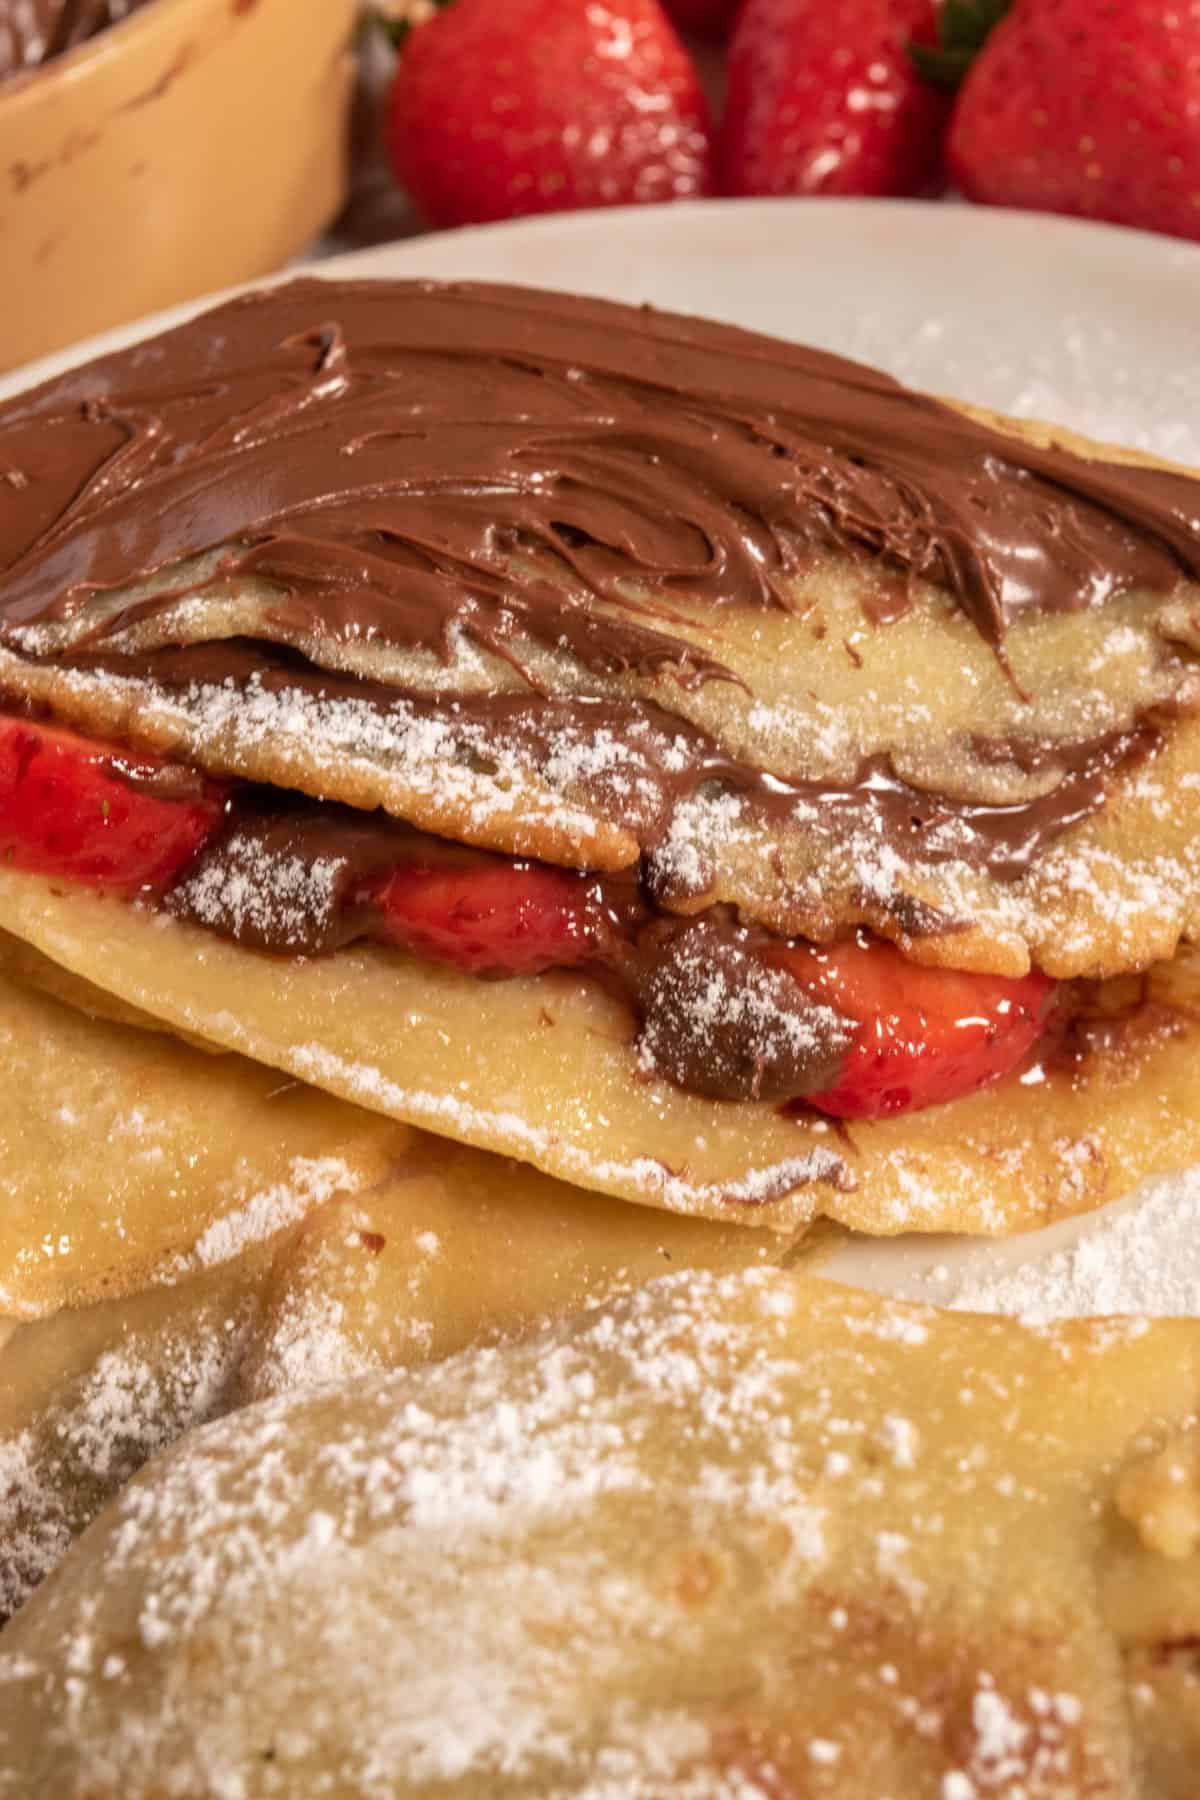 A zoomed shot of a chocolate covered crepe which is filled with fresh fruit. 